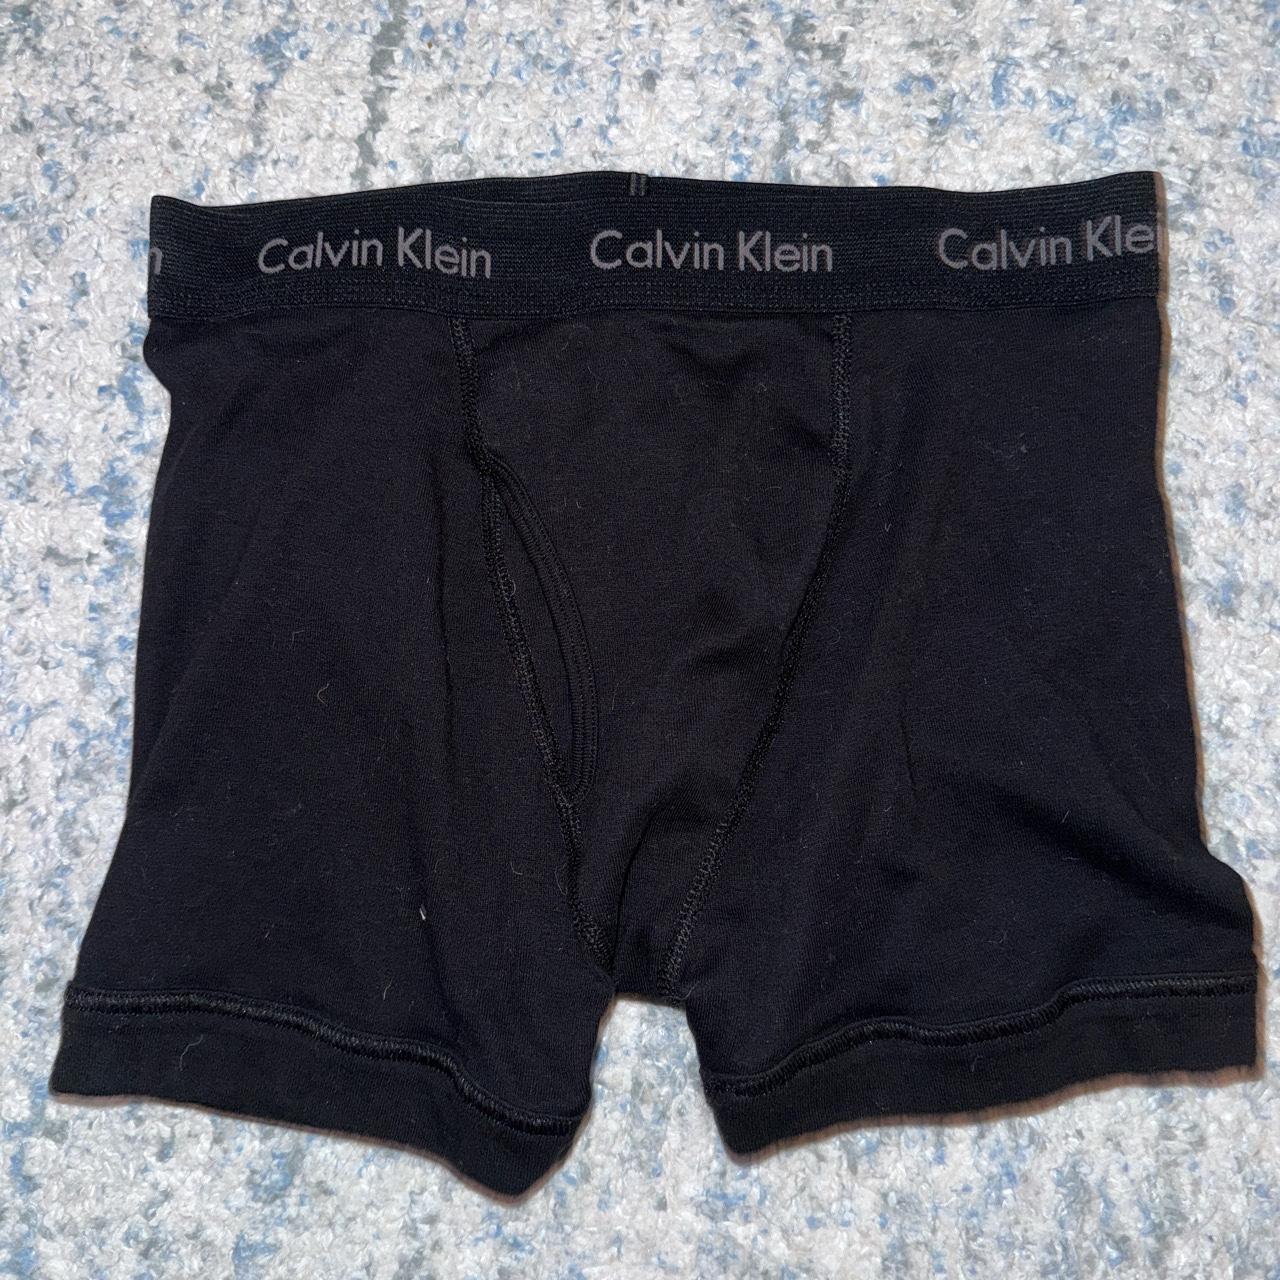 Calvin Klein heart boxers and shorts size small. - Depop